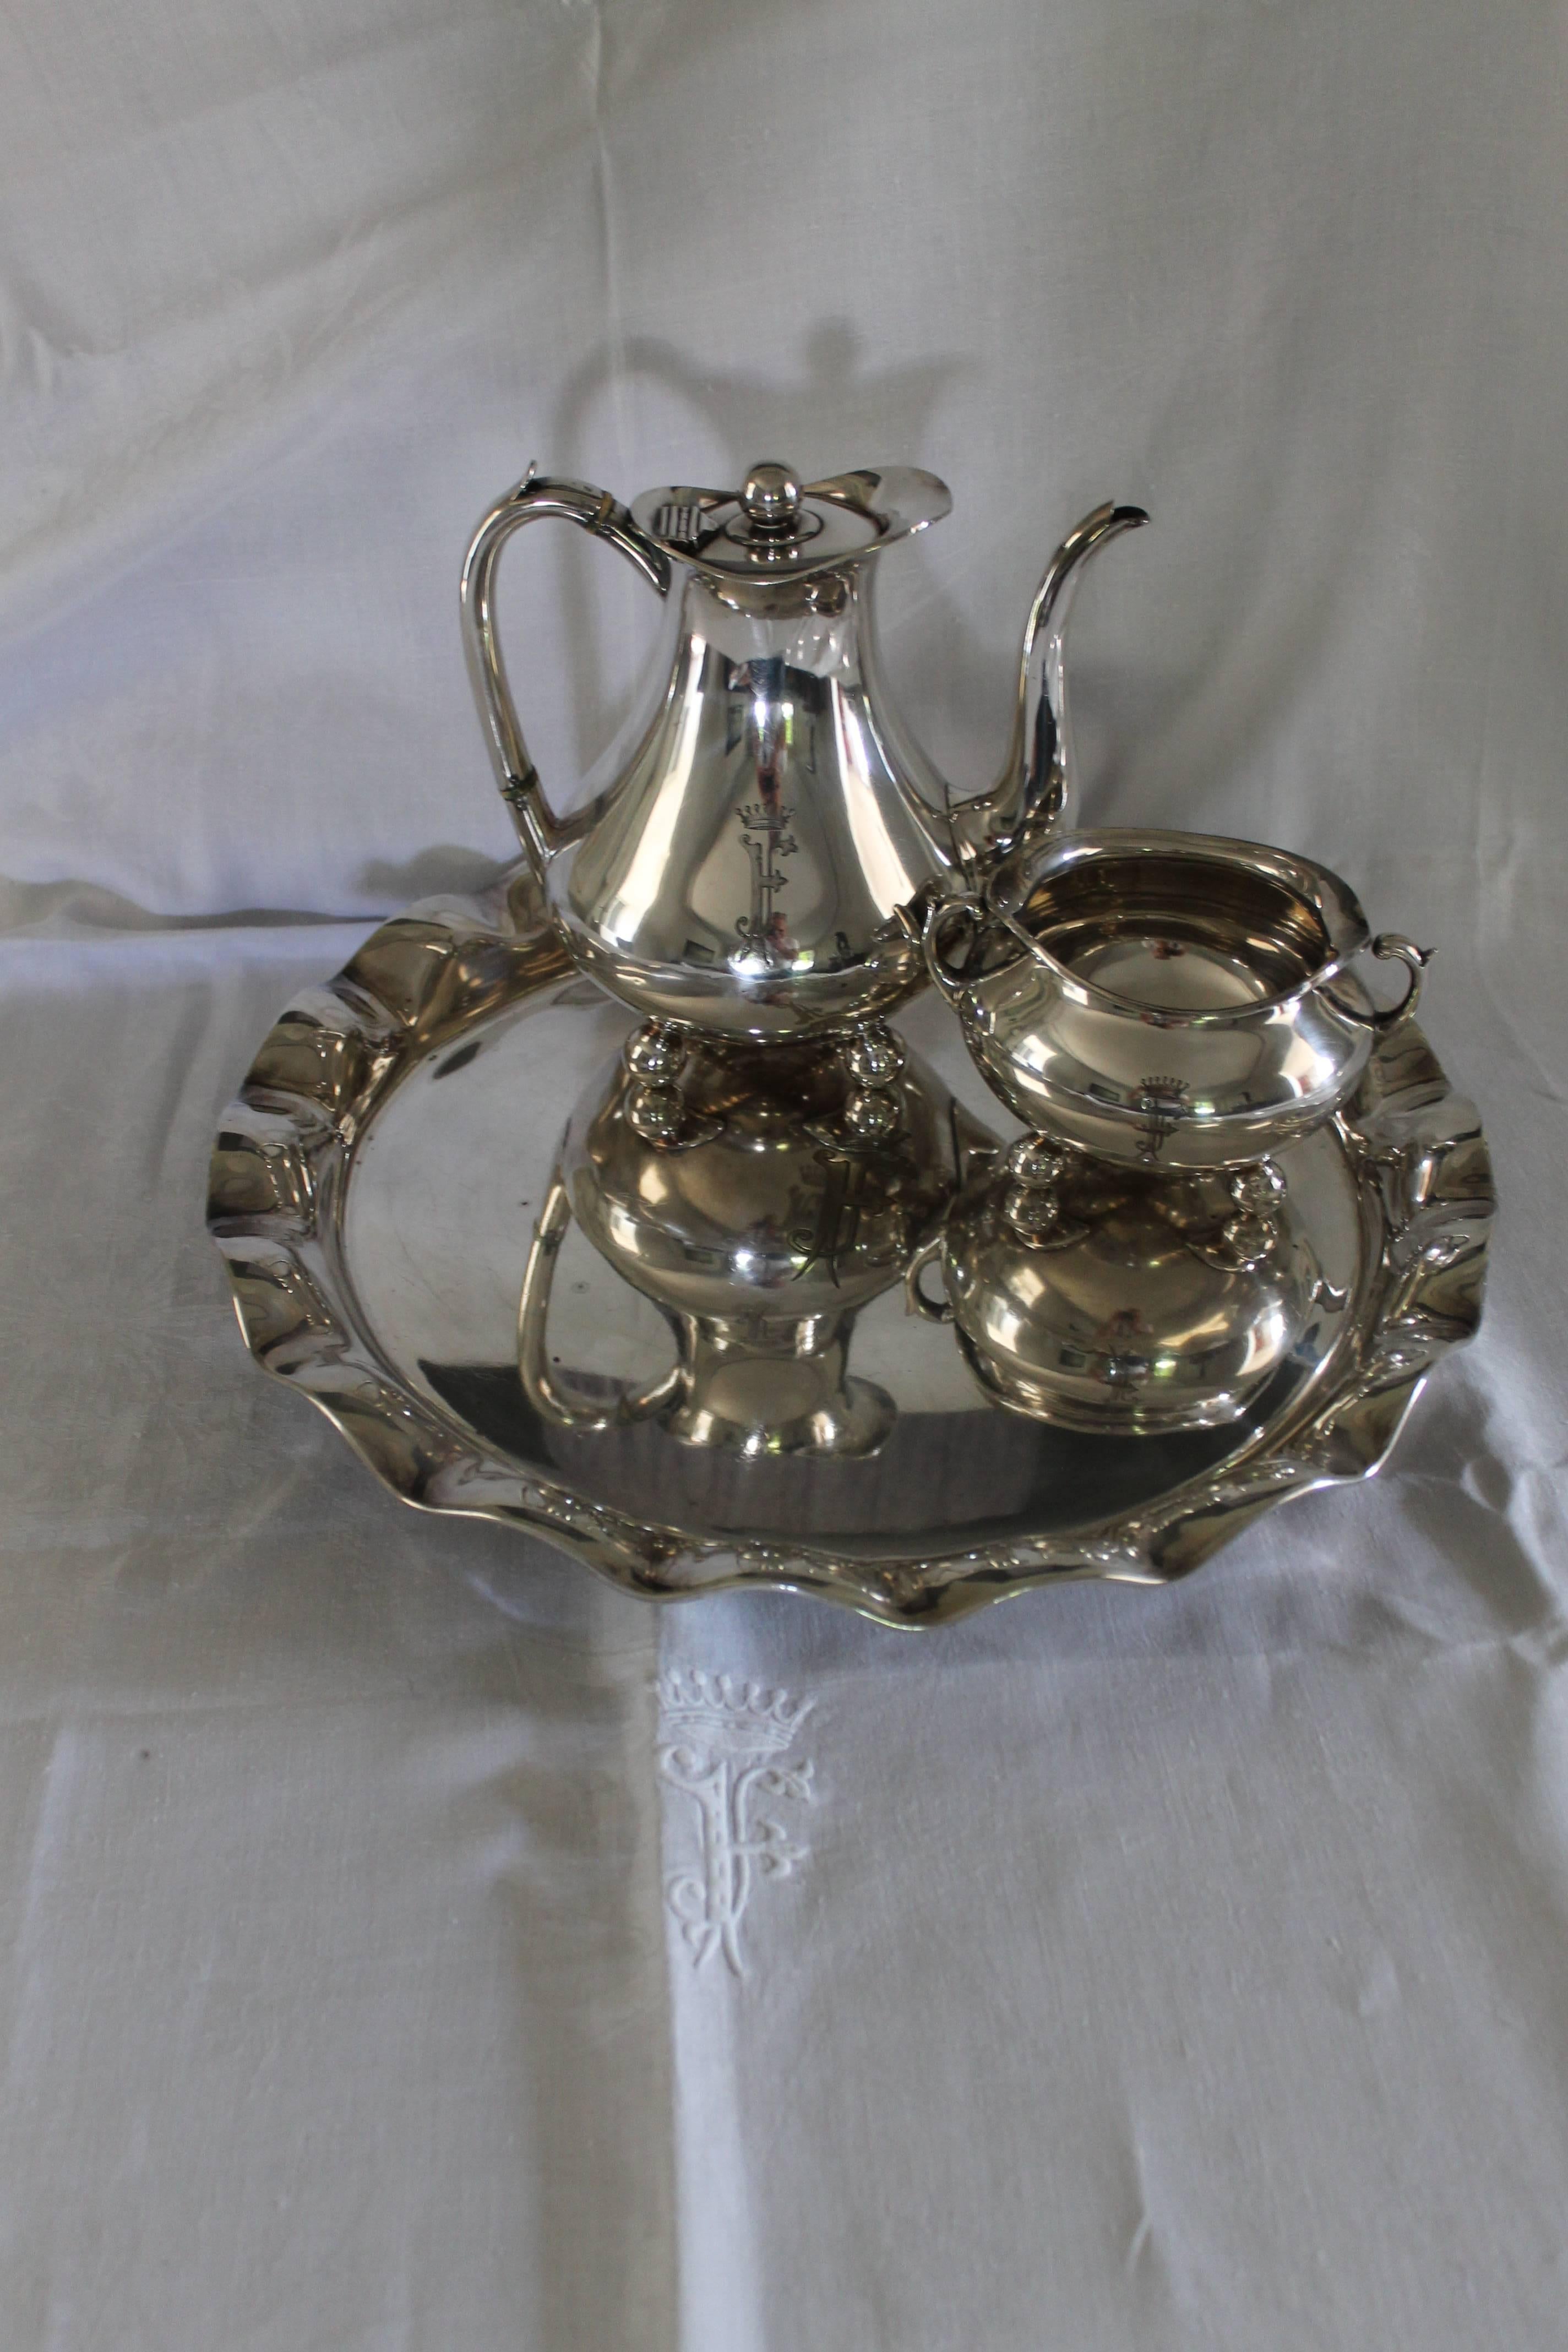 Three pieces coffee service by Mappin brothers. Franchetti's family emblem engraved. 

The Franchetti's were a noble family who had an important role in Italy's history. Raimondo Franchetti I married Luisa Rothschild and had three children: